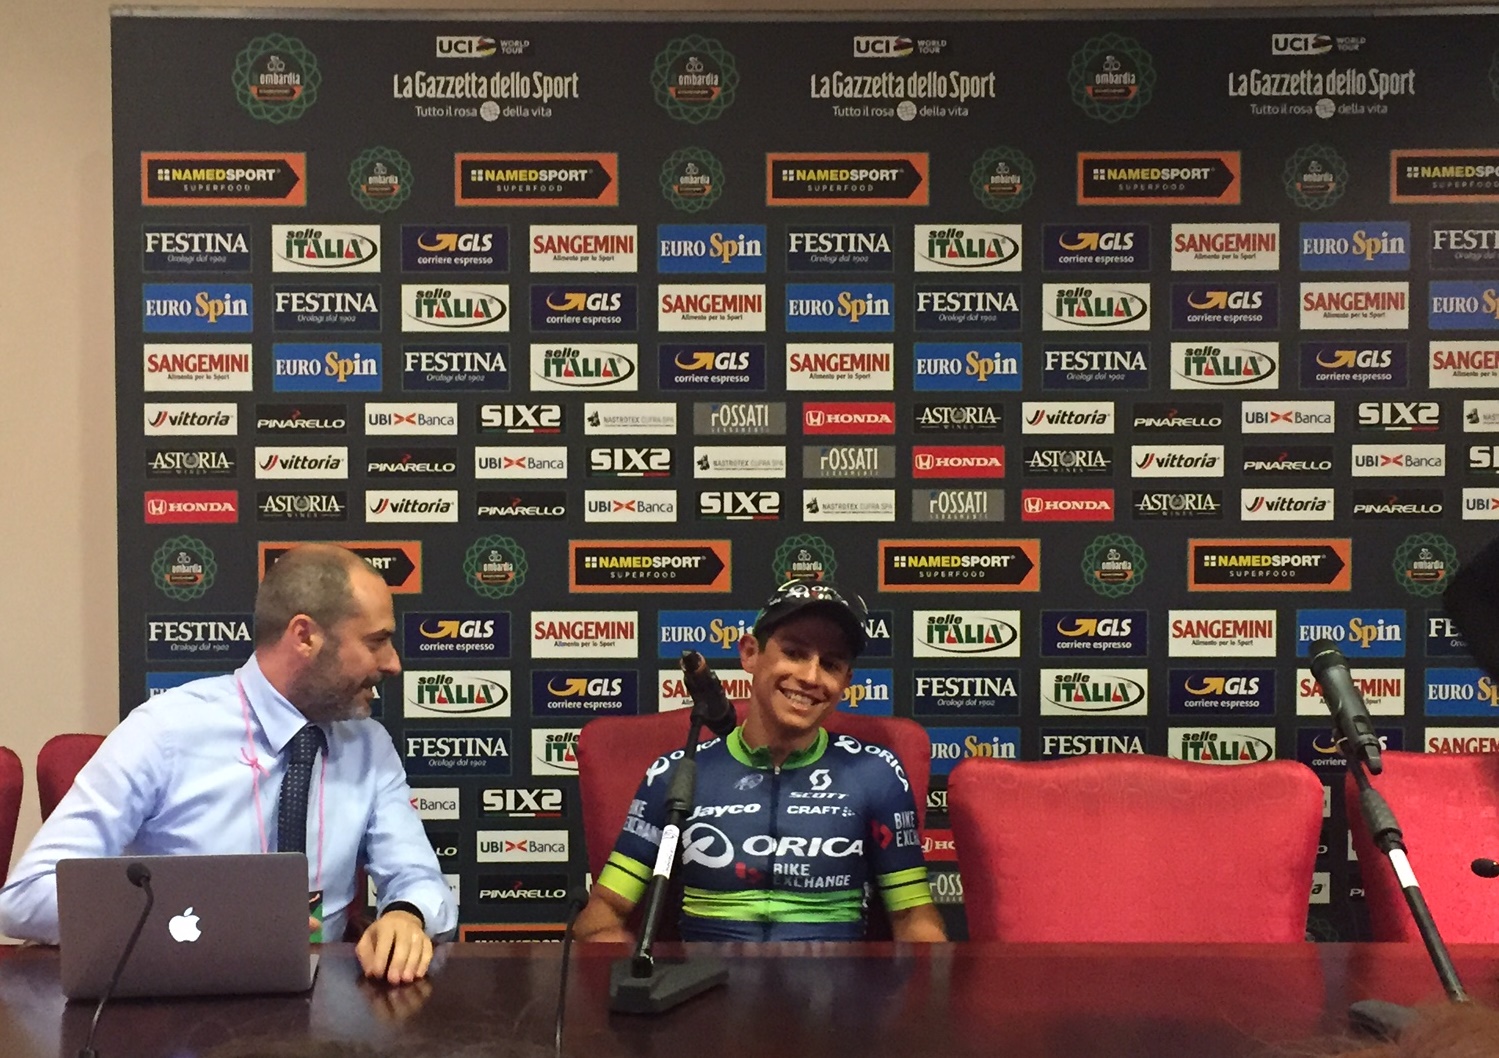 Esteban Chaves in the Press Room